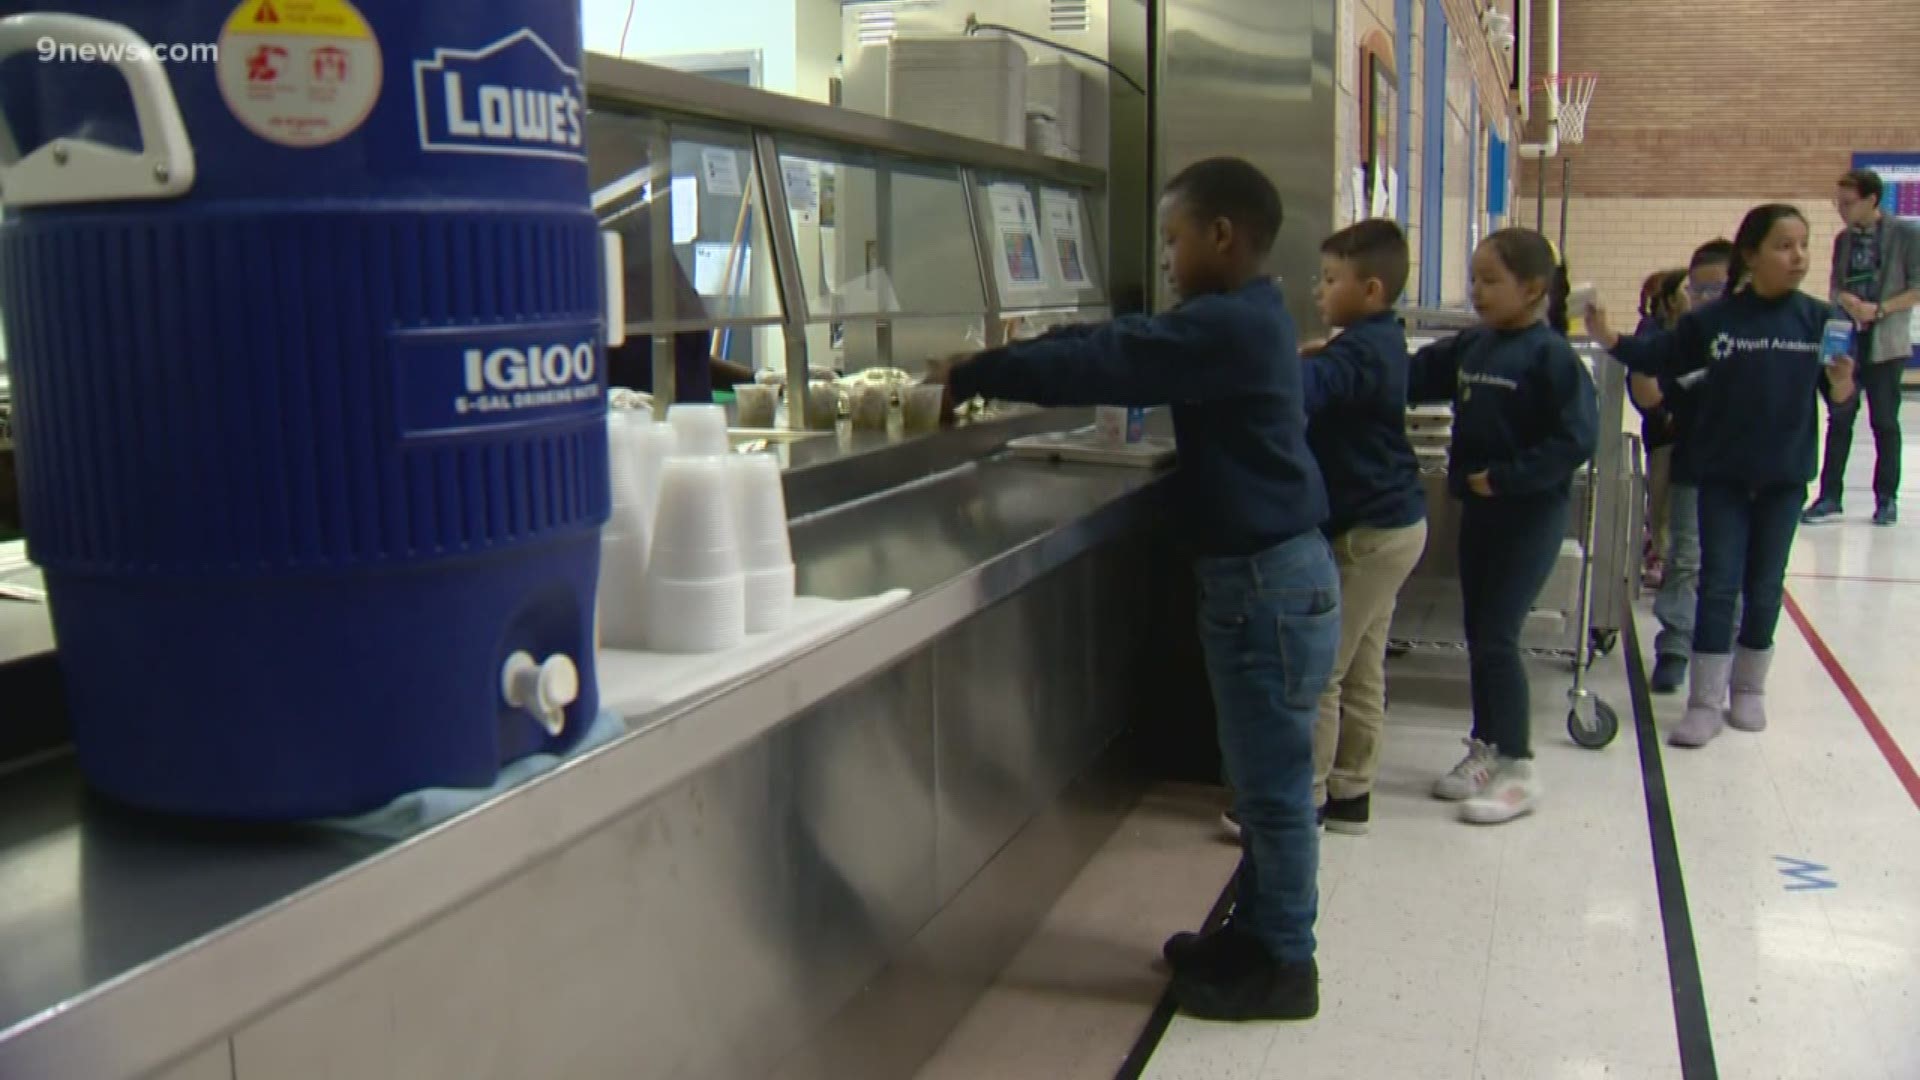 Schools across Denver are working to deliver lunches to kids in need after class was canceled due to the COVID-19 pandemic.